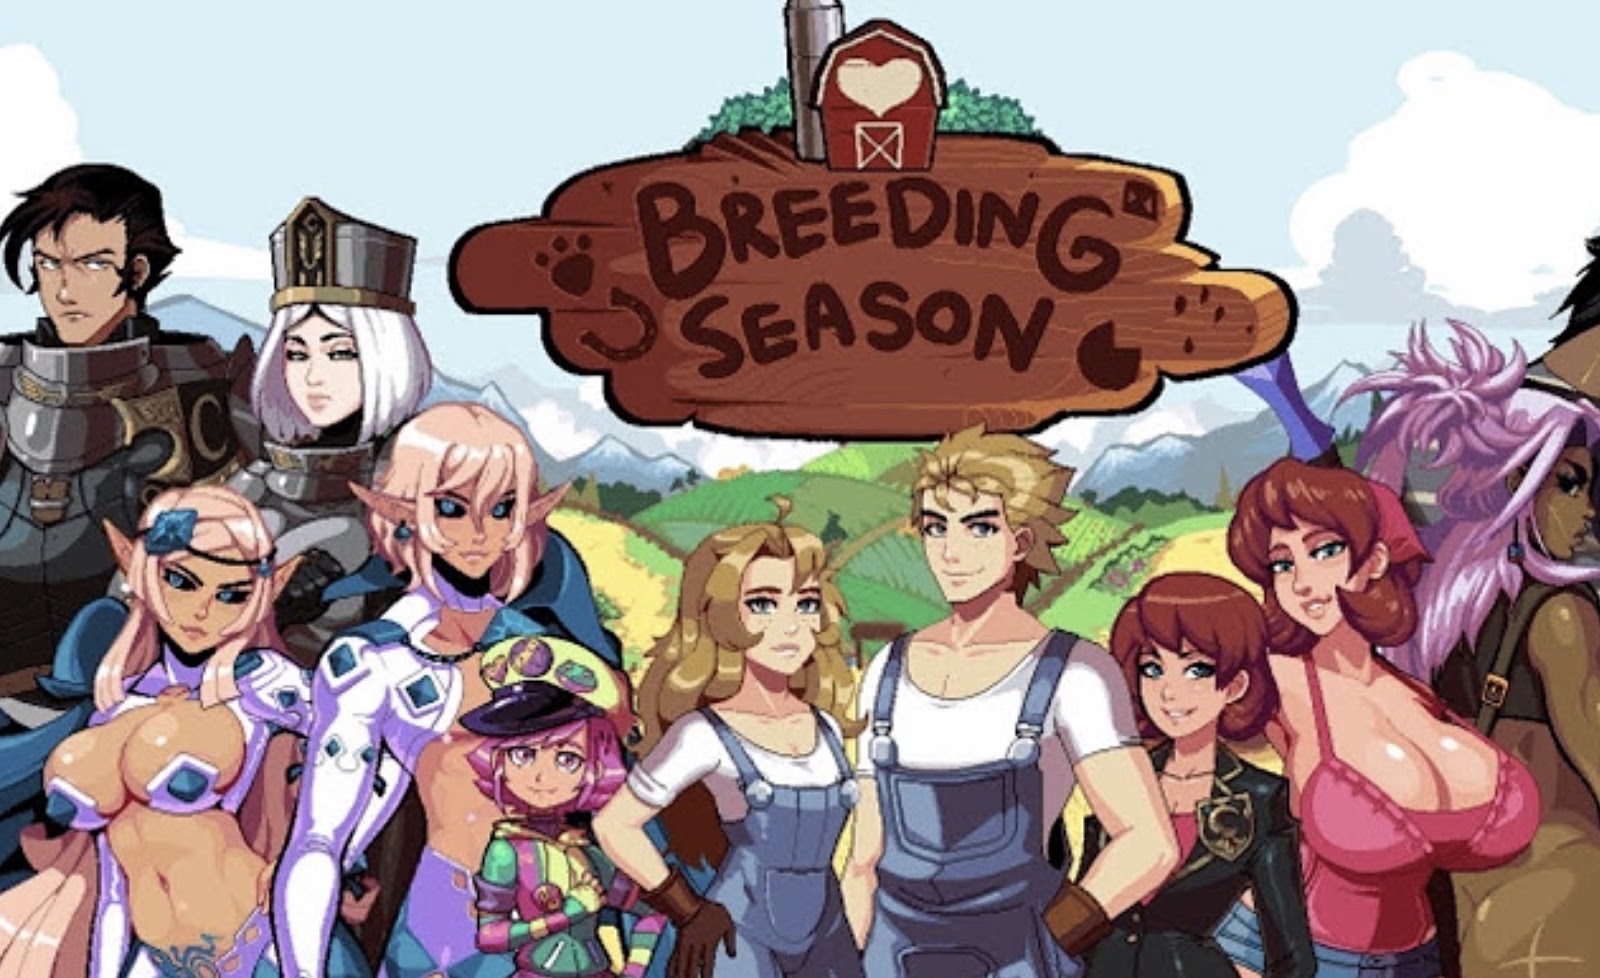 Characters of the game Breeding Season